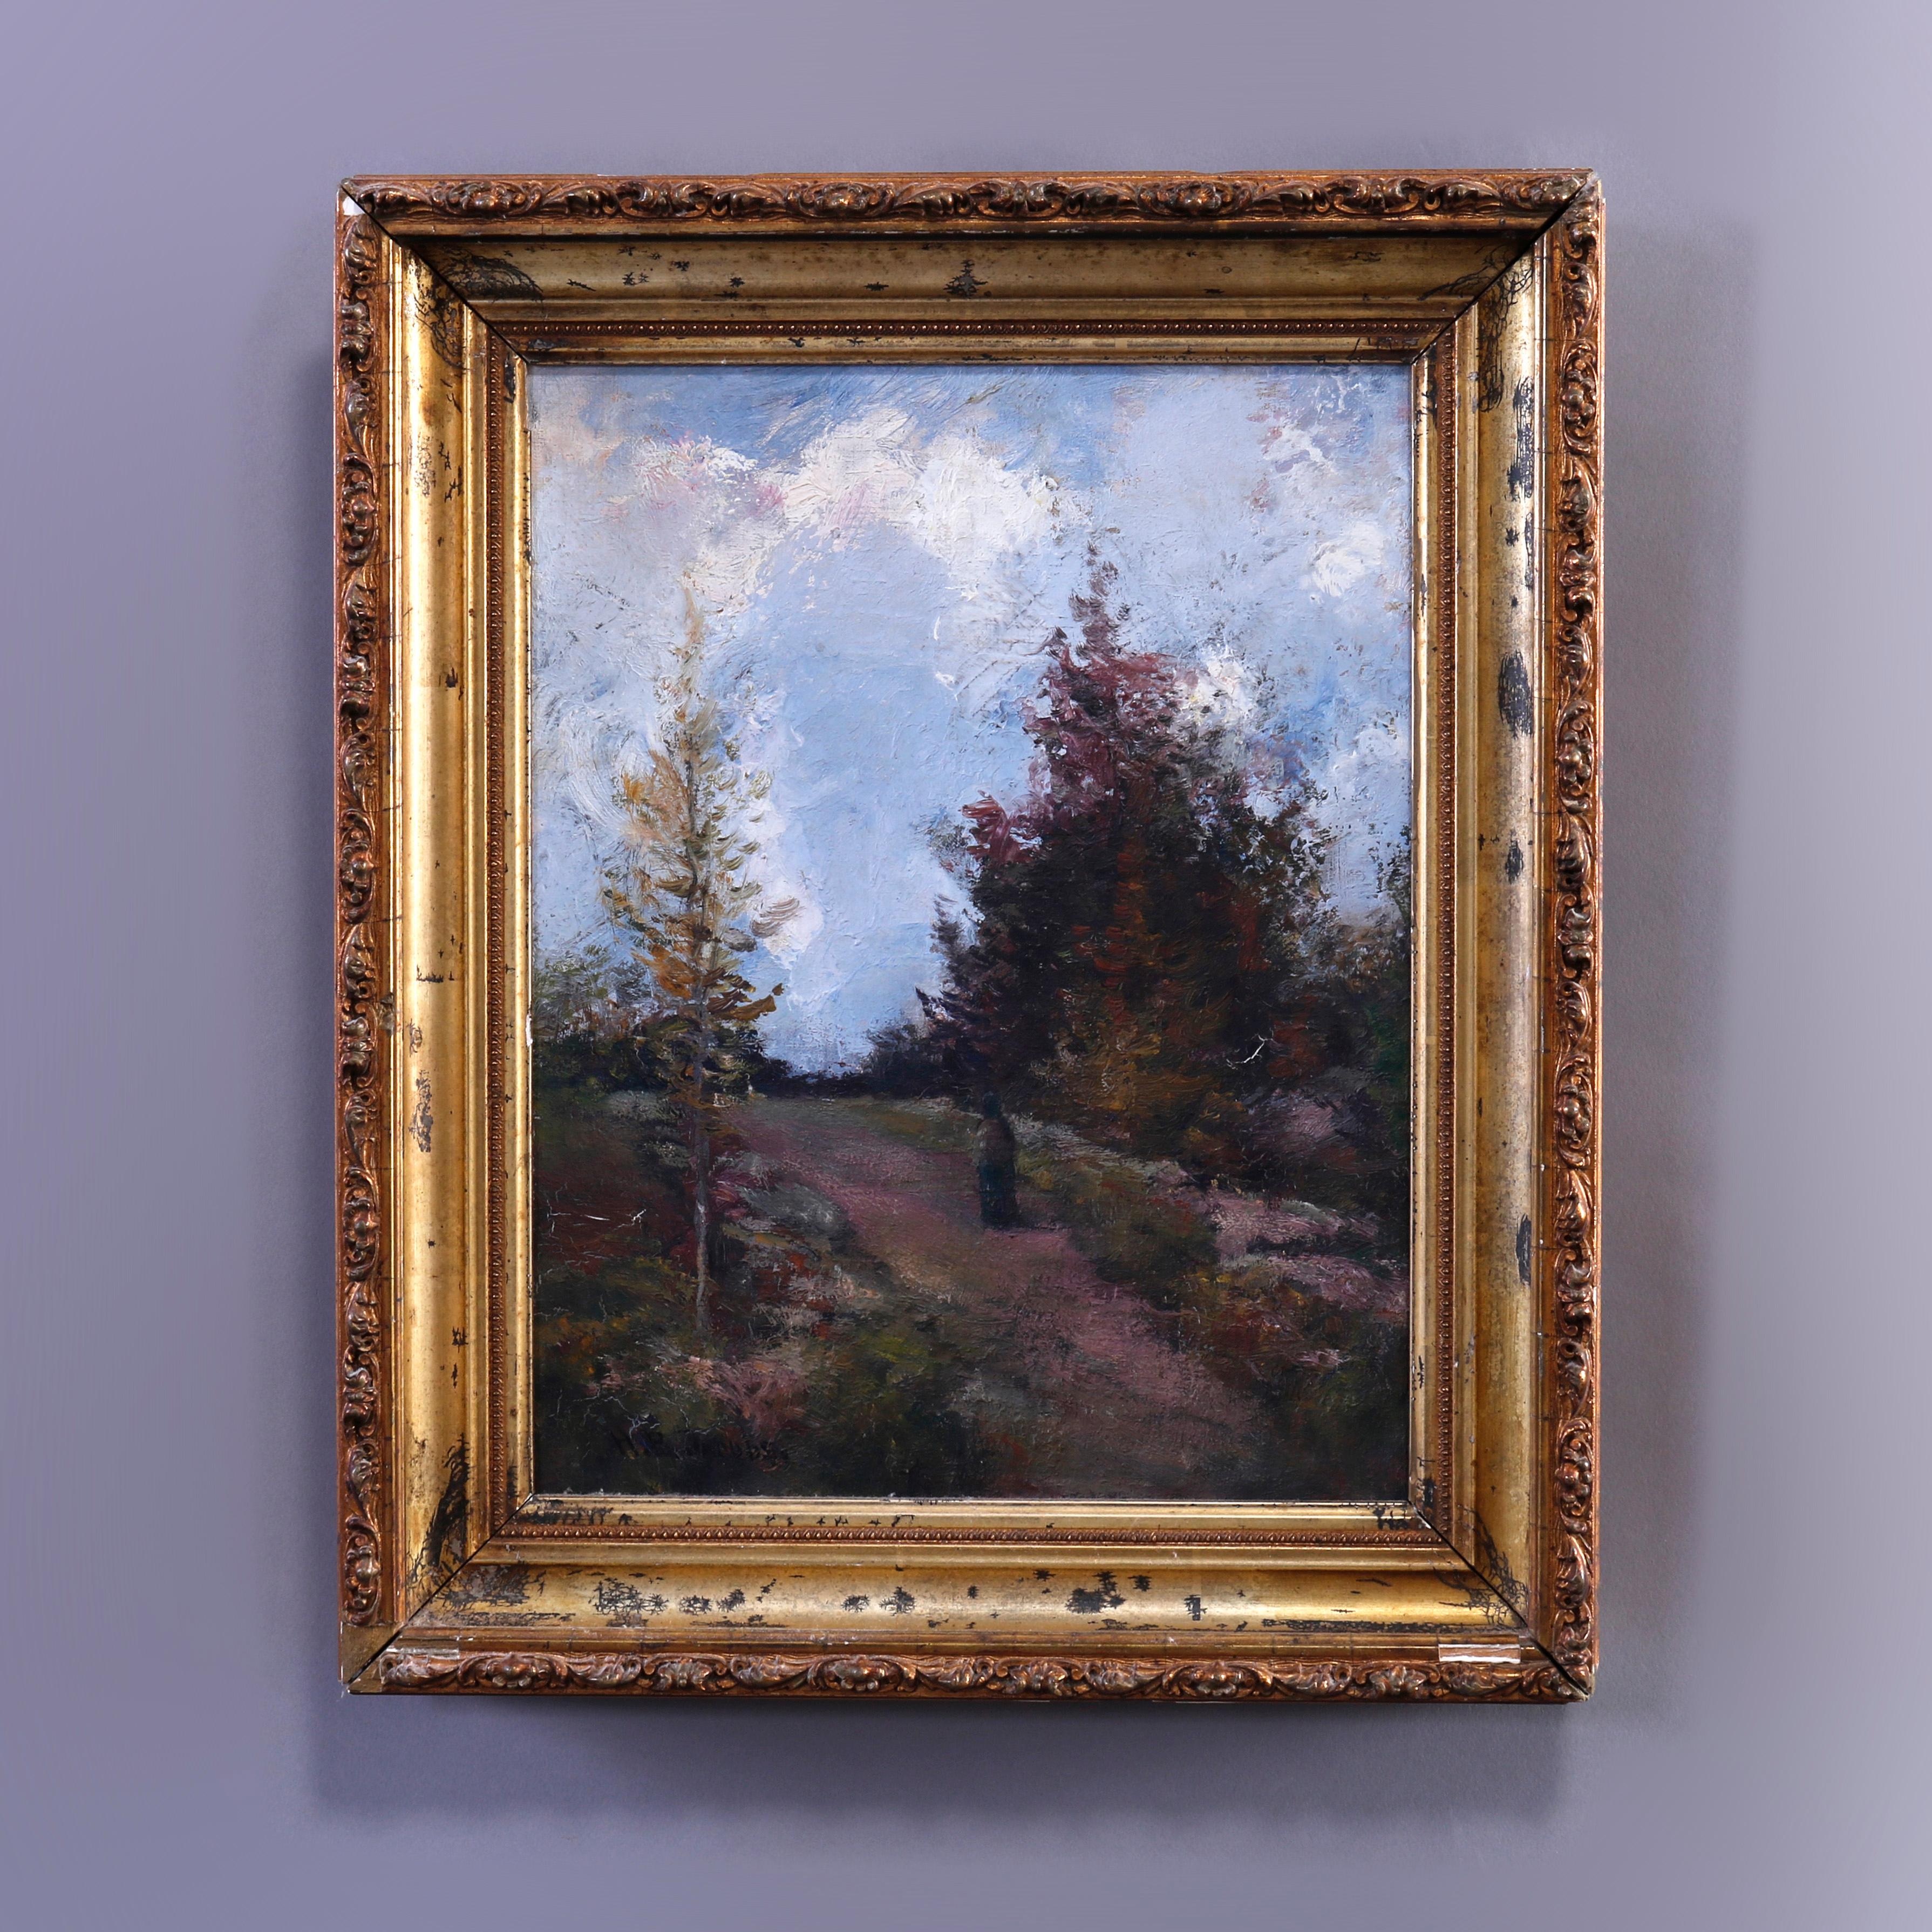 An antique impressionist landscape painting by Hobart B. Jacobs titled 